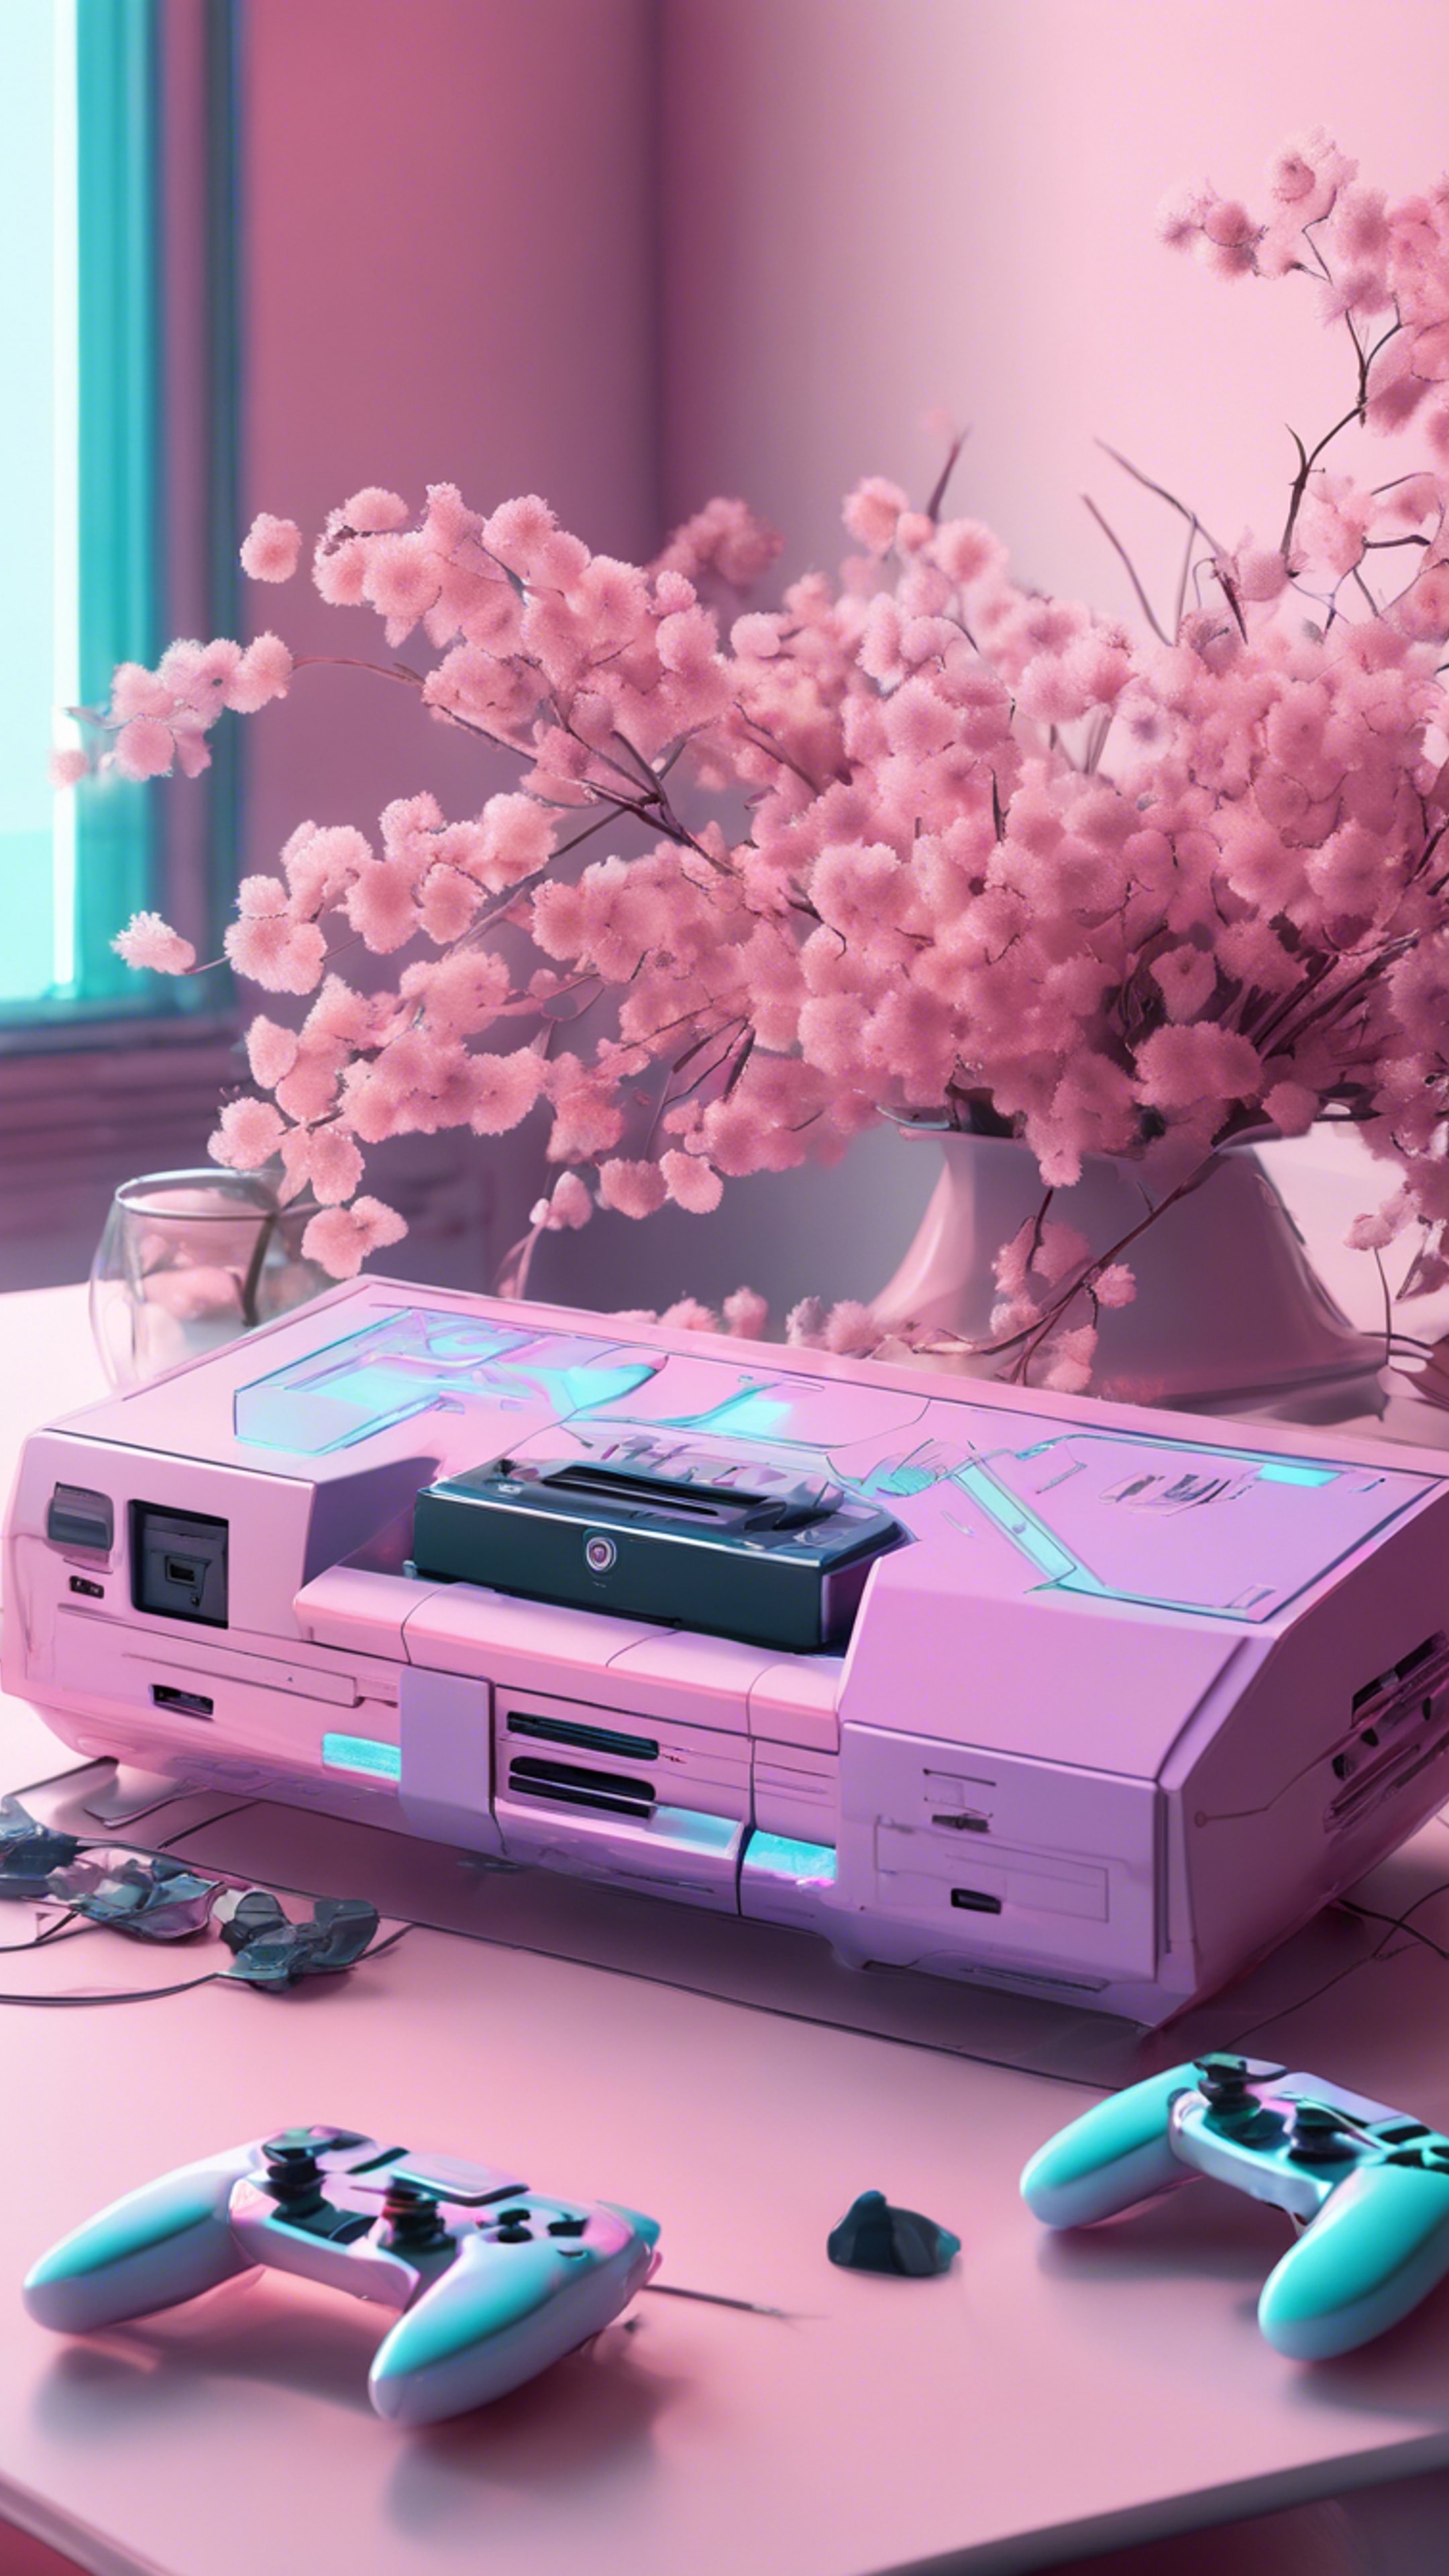 A pastel colored gaming console on a white table next to soft colored flowers in a daylight room. Wallpaper[43bf14bcce304acdbb24]